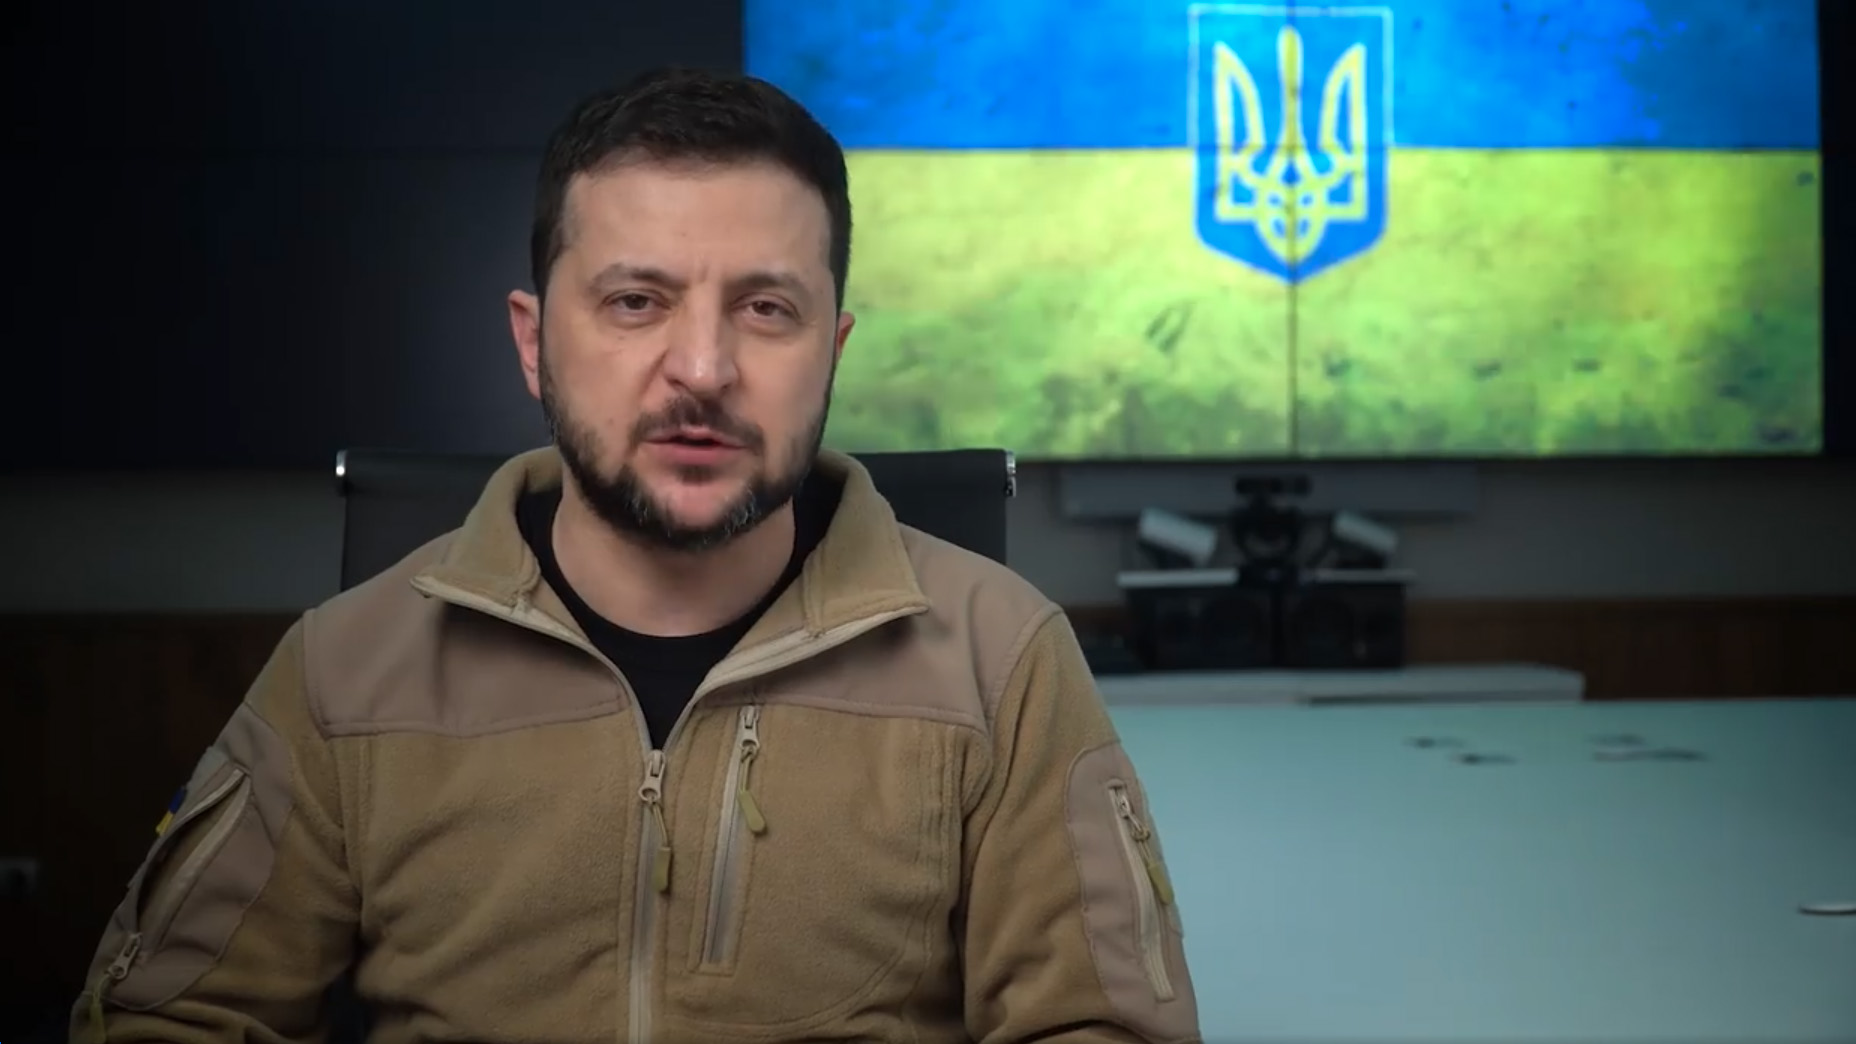 The Ukrainian government is working to evacuate the military, doctor and wounded from Azovstal, says Zelensky